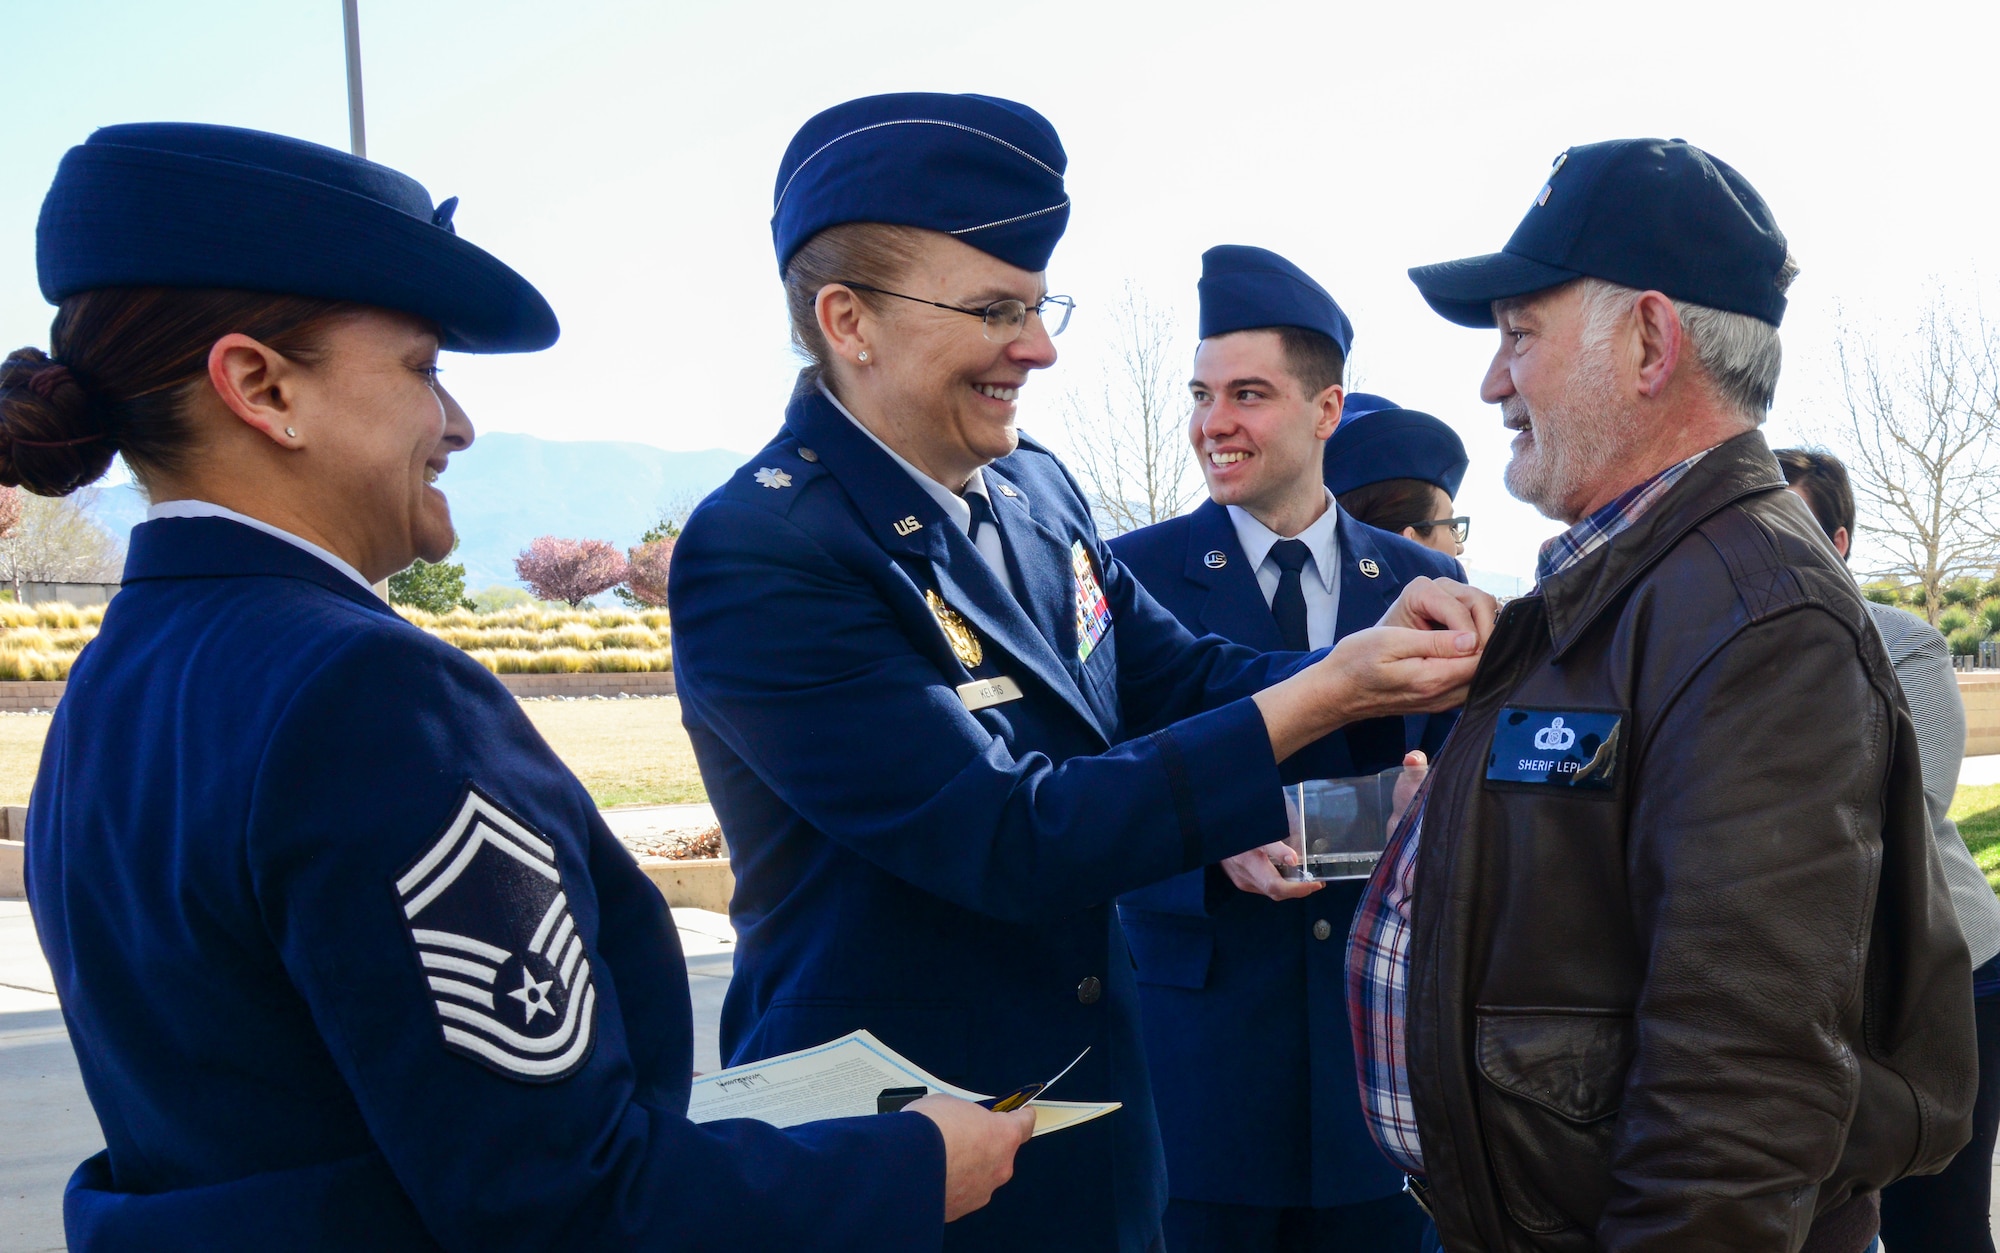 Lt. Col. Samantha Kelpis, with the Air Force Inspection Agency, pins Sherif Lepi during a ceremony to commemorate Vietnam Veterans Day at the New Mexico Veterans Memorial, March 29, 2019. Various organizations from Kirtland Air Force Base, including the Defense Commissary Agency and the Army and Air Force Exchange Service worked together to make the ceremony special for the state's Vietnam veterans. (U.S. Air Force photo by Jessie Perkins)